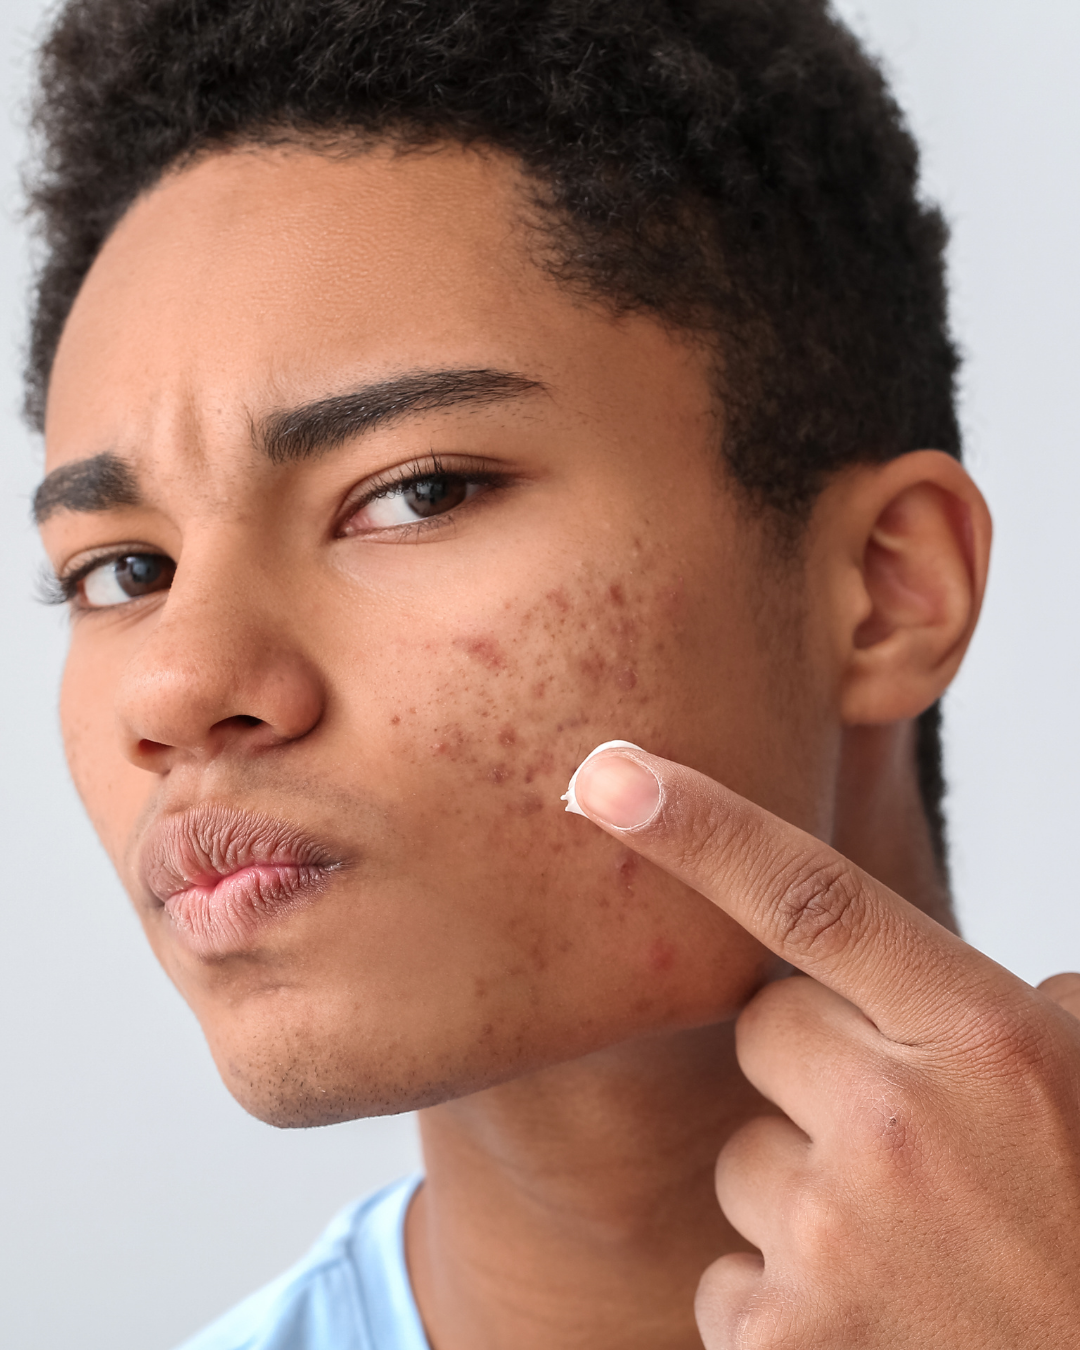 What Causes My Acne?